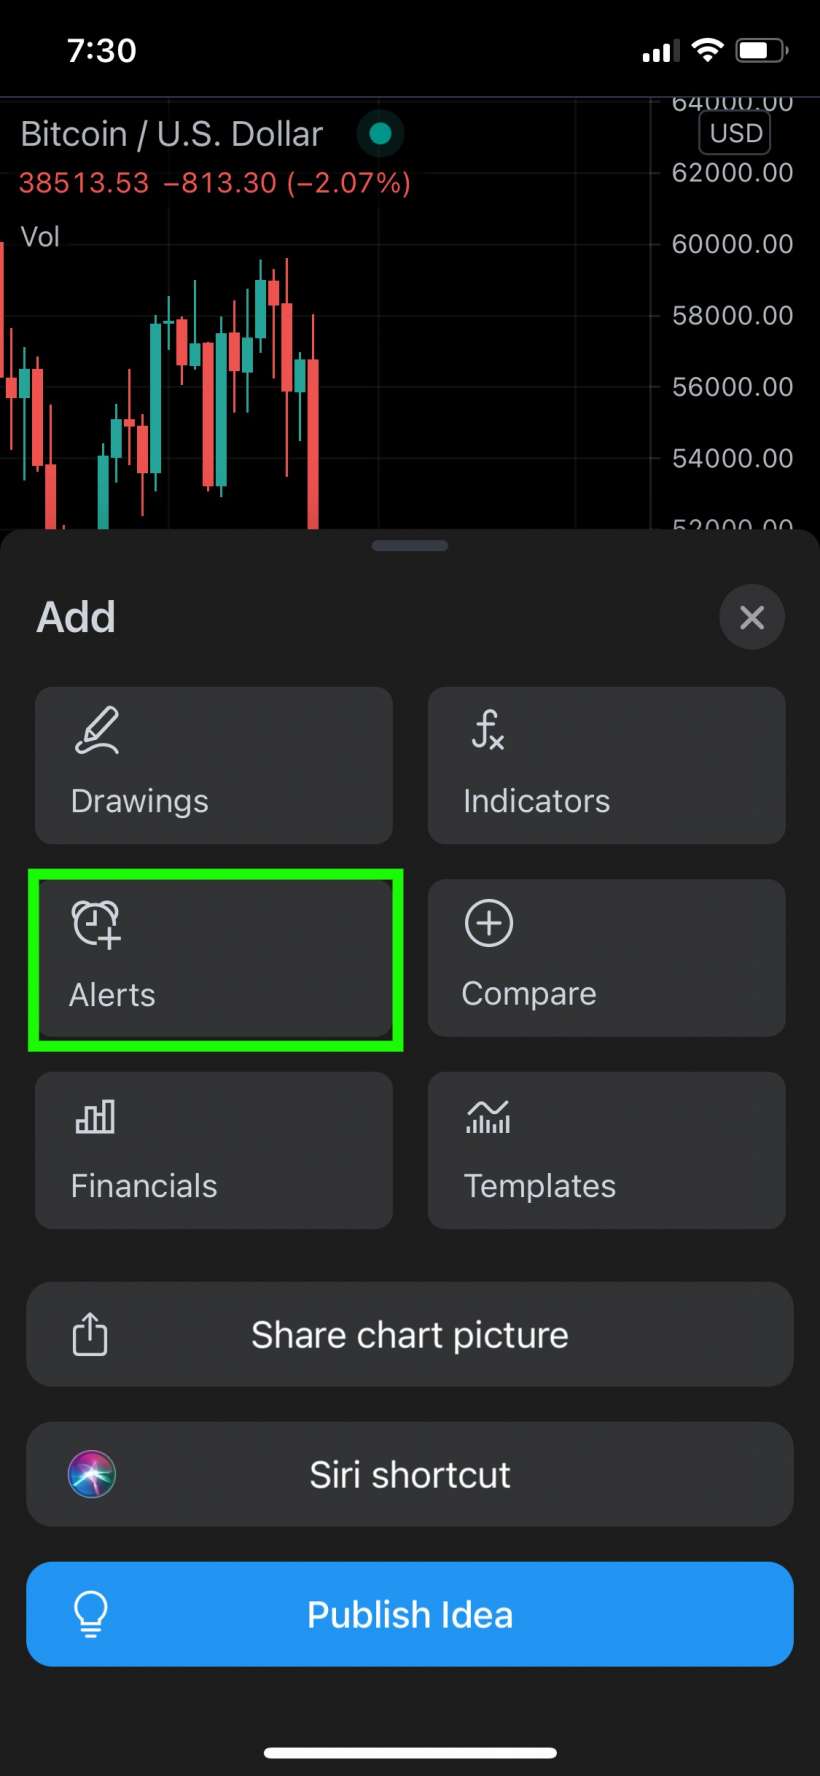 How to set price alerts for Bitcoin, Ethereum and other cryptocurrencies on iPhone and iPad.